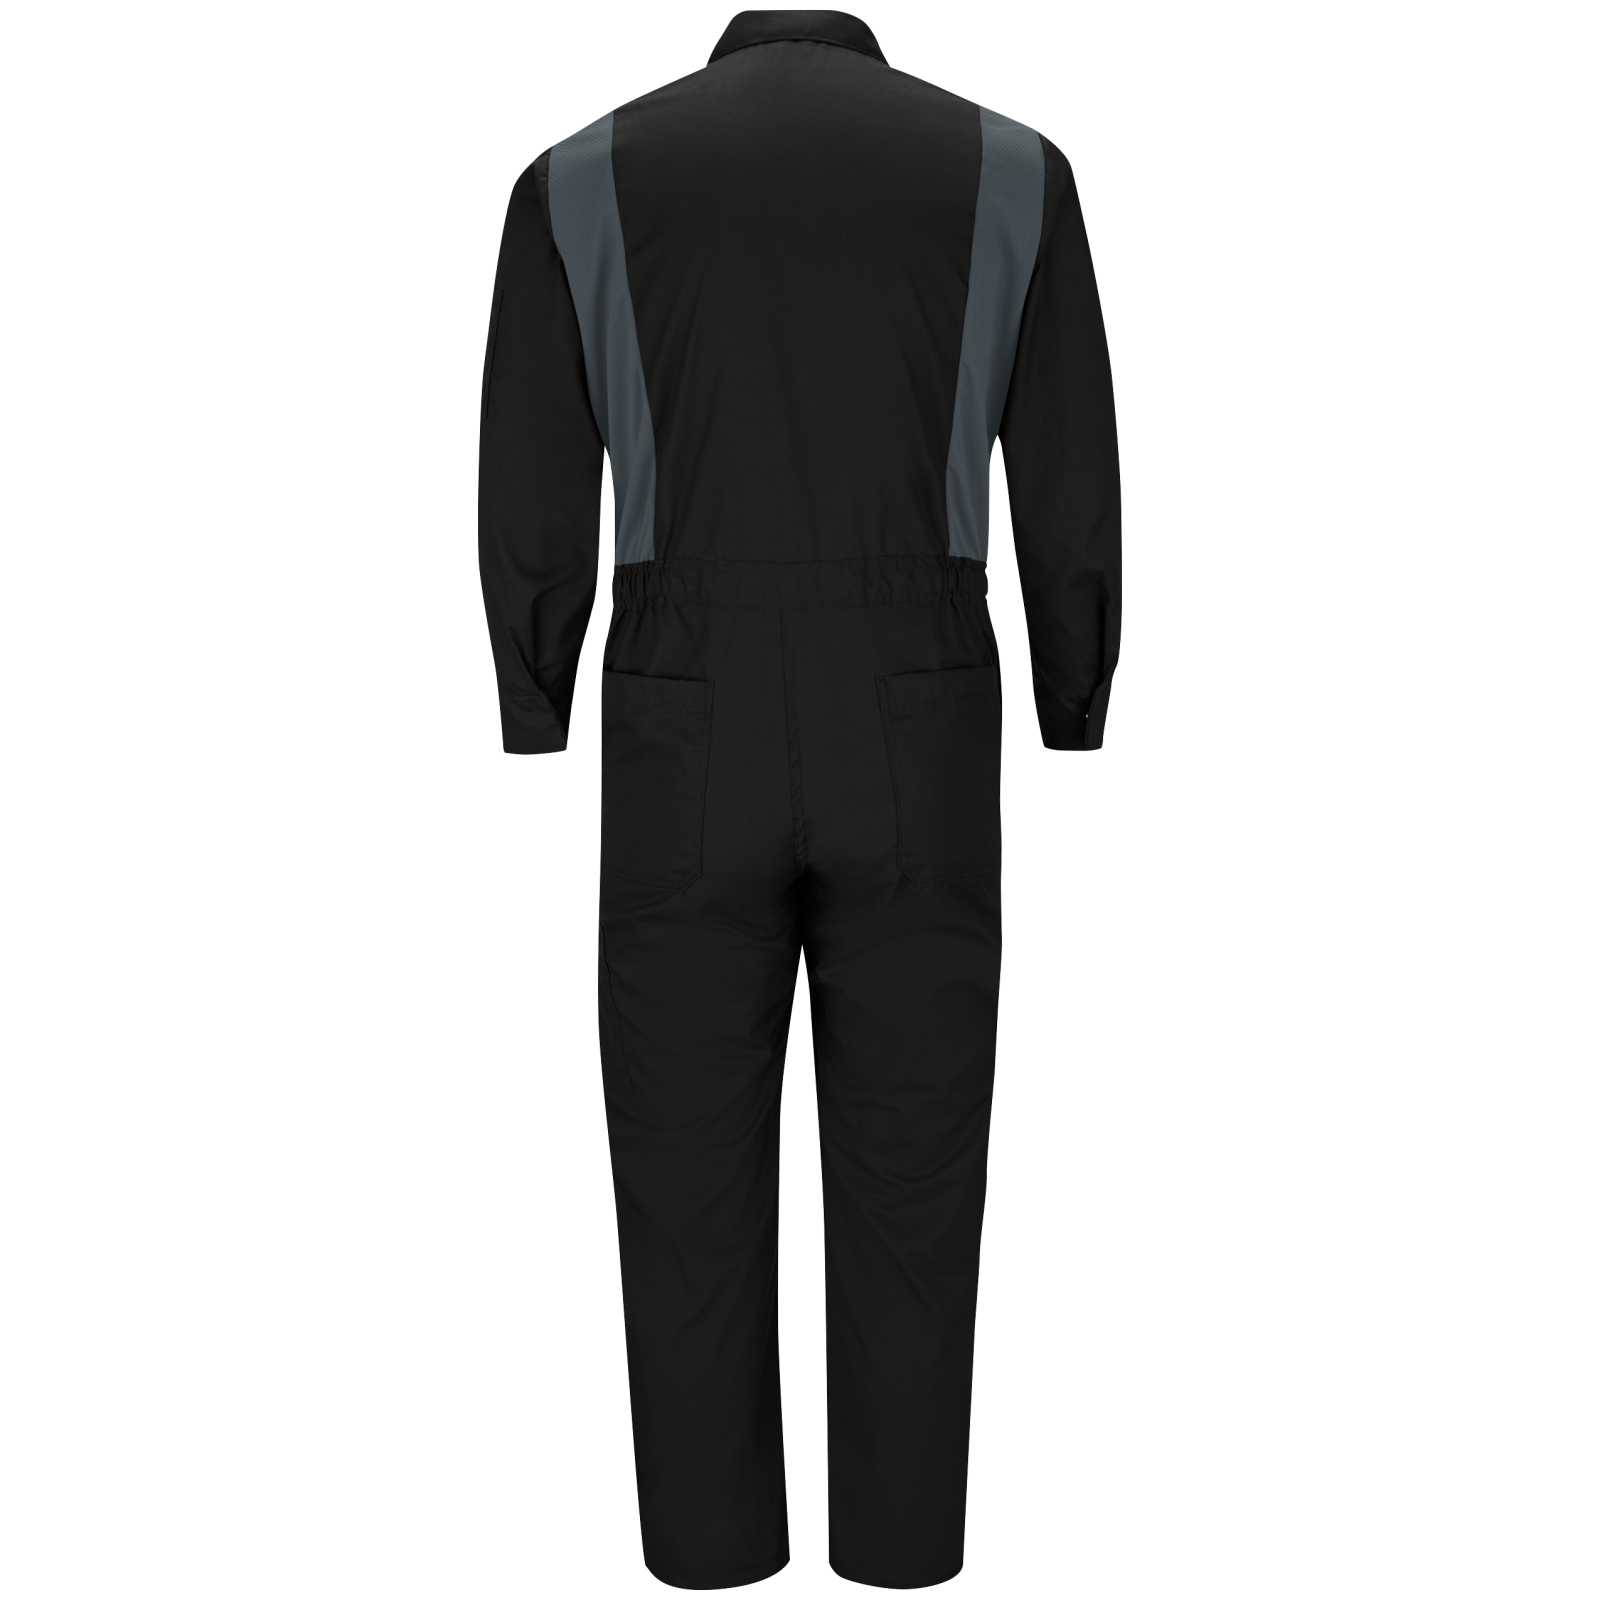 CASE IH custom embroidered Boiler suit Coverall Overall 